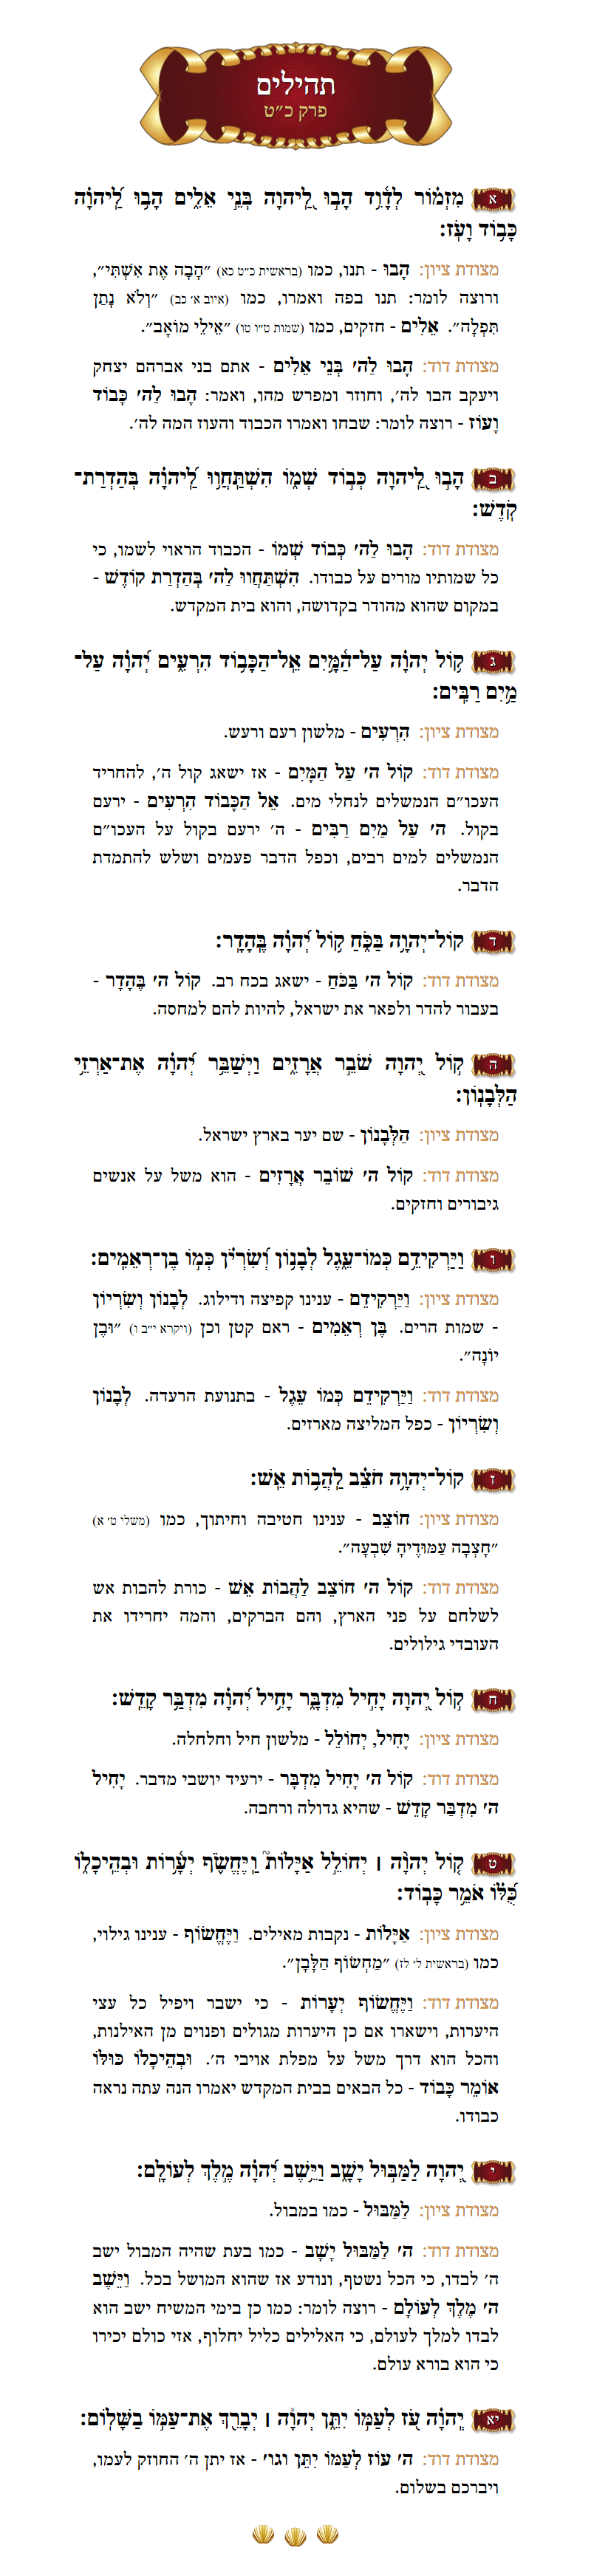 Sefer Tehillim Chapter 29 with commentary